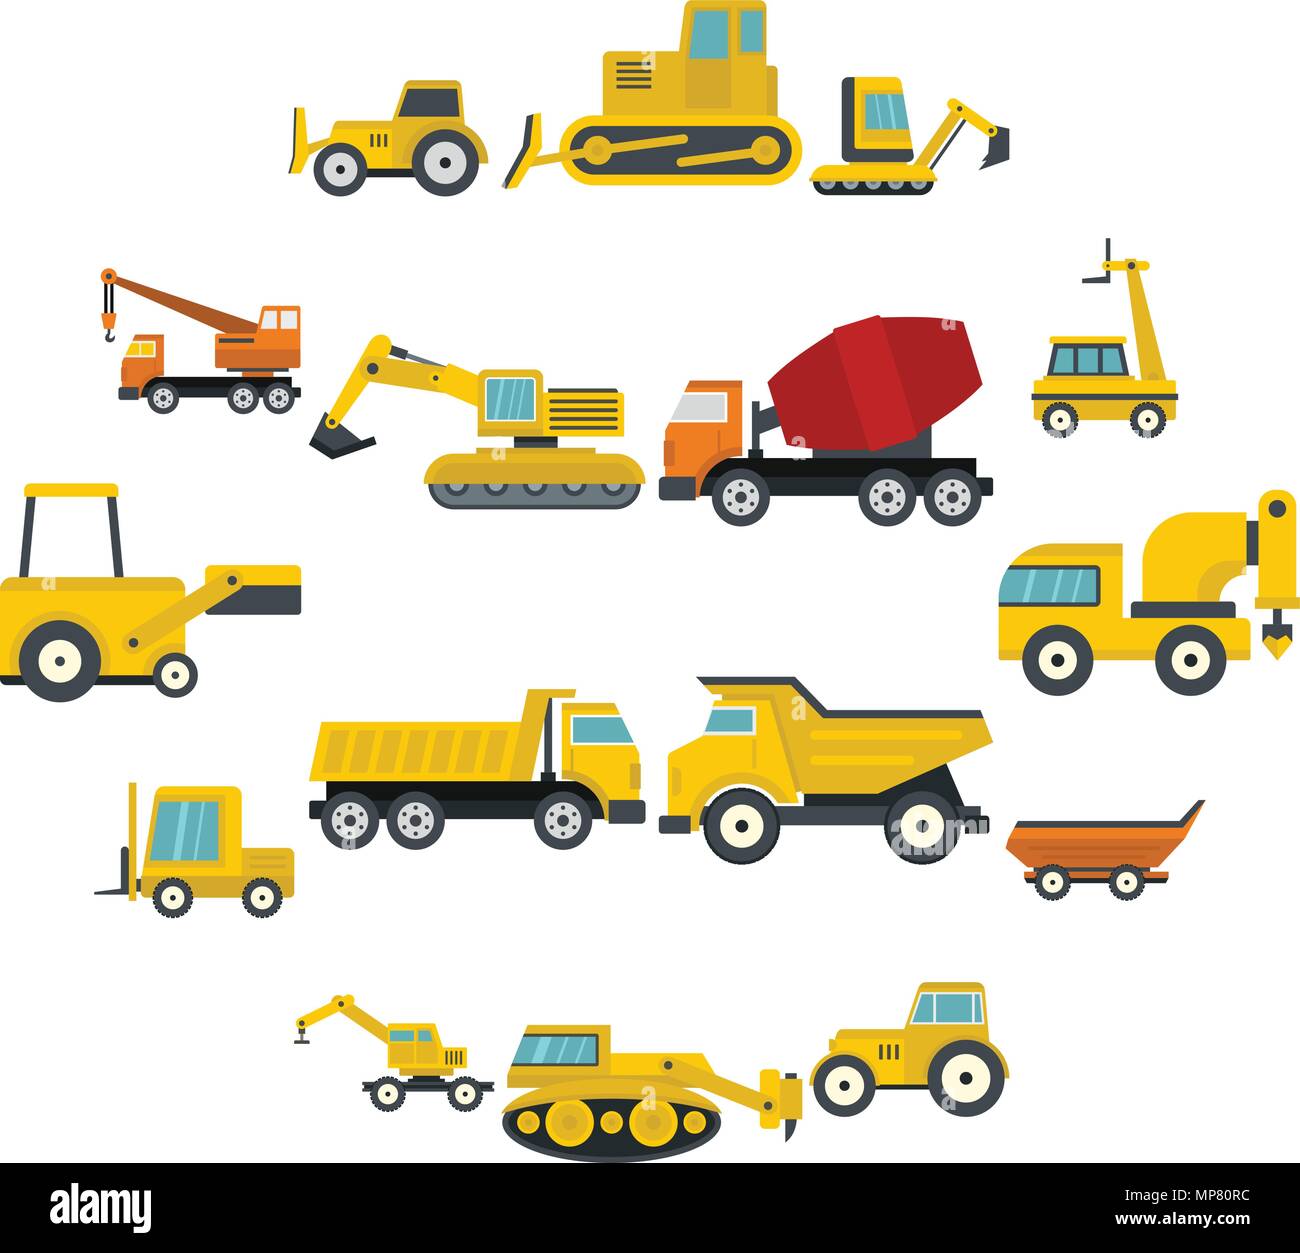 Building vehicles icons set in flat style Stock Vector